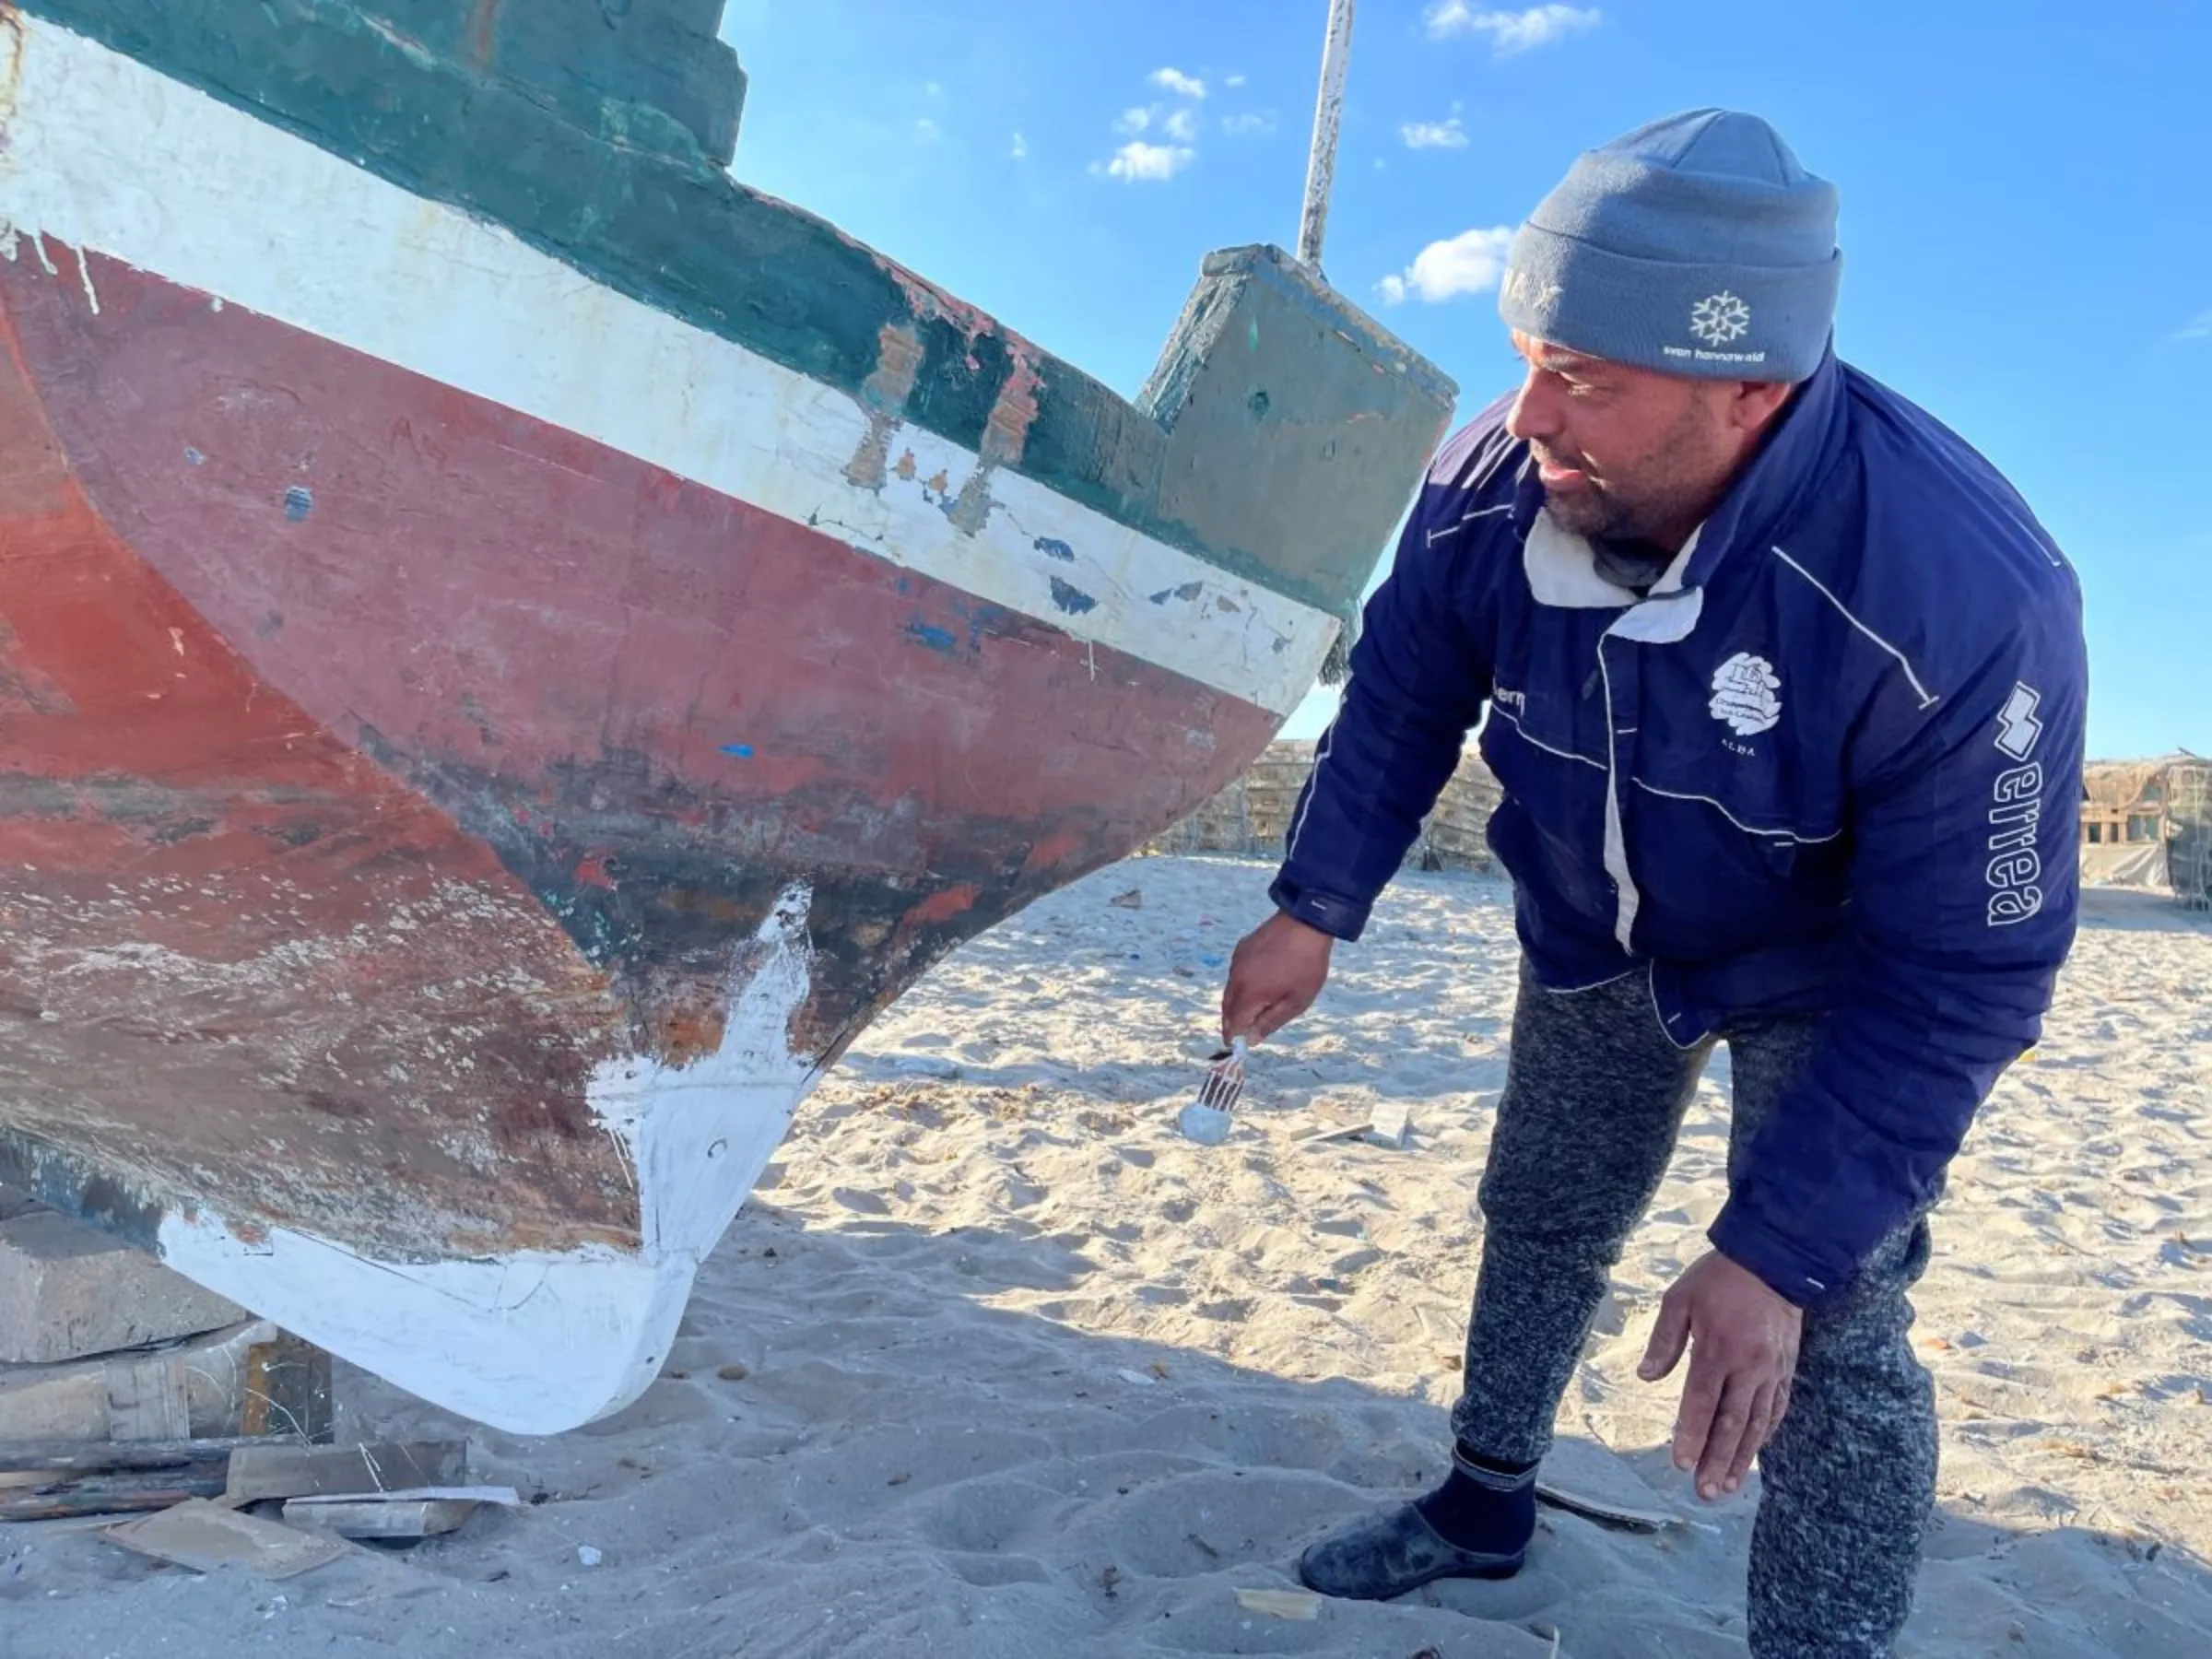 Mohamed Ali, a 39-year-old fisherman, checks his boat in Ghannounch, Gabes, southern Tunisia on February 1, 2022. Thomson Reuters Foundation/Menna A. Farouk